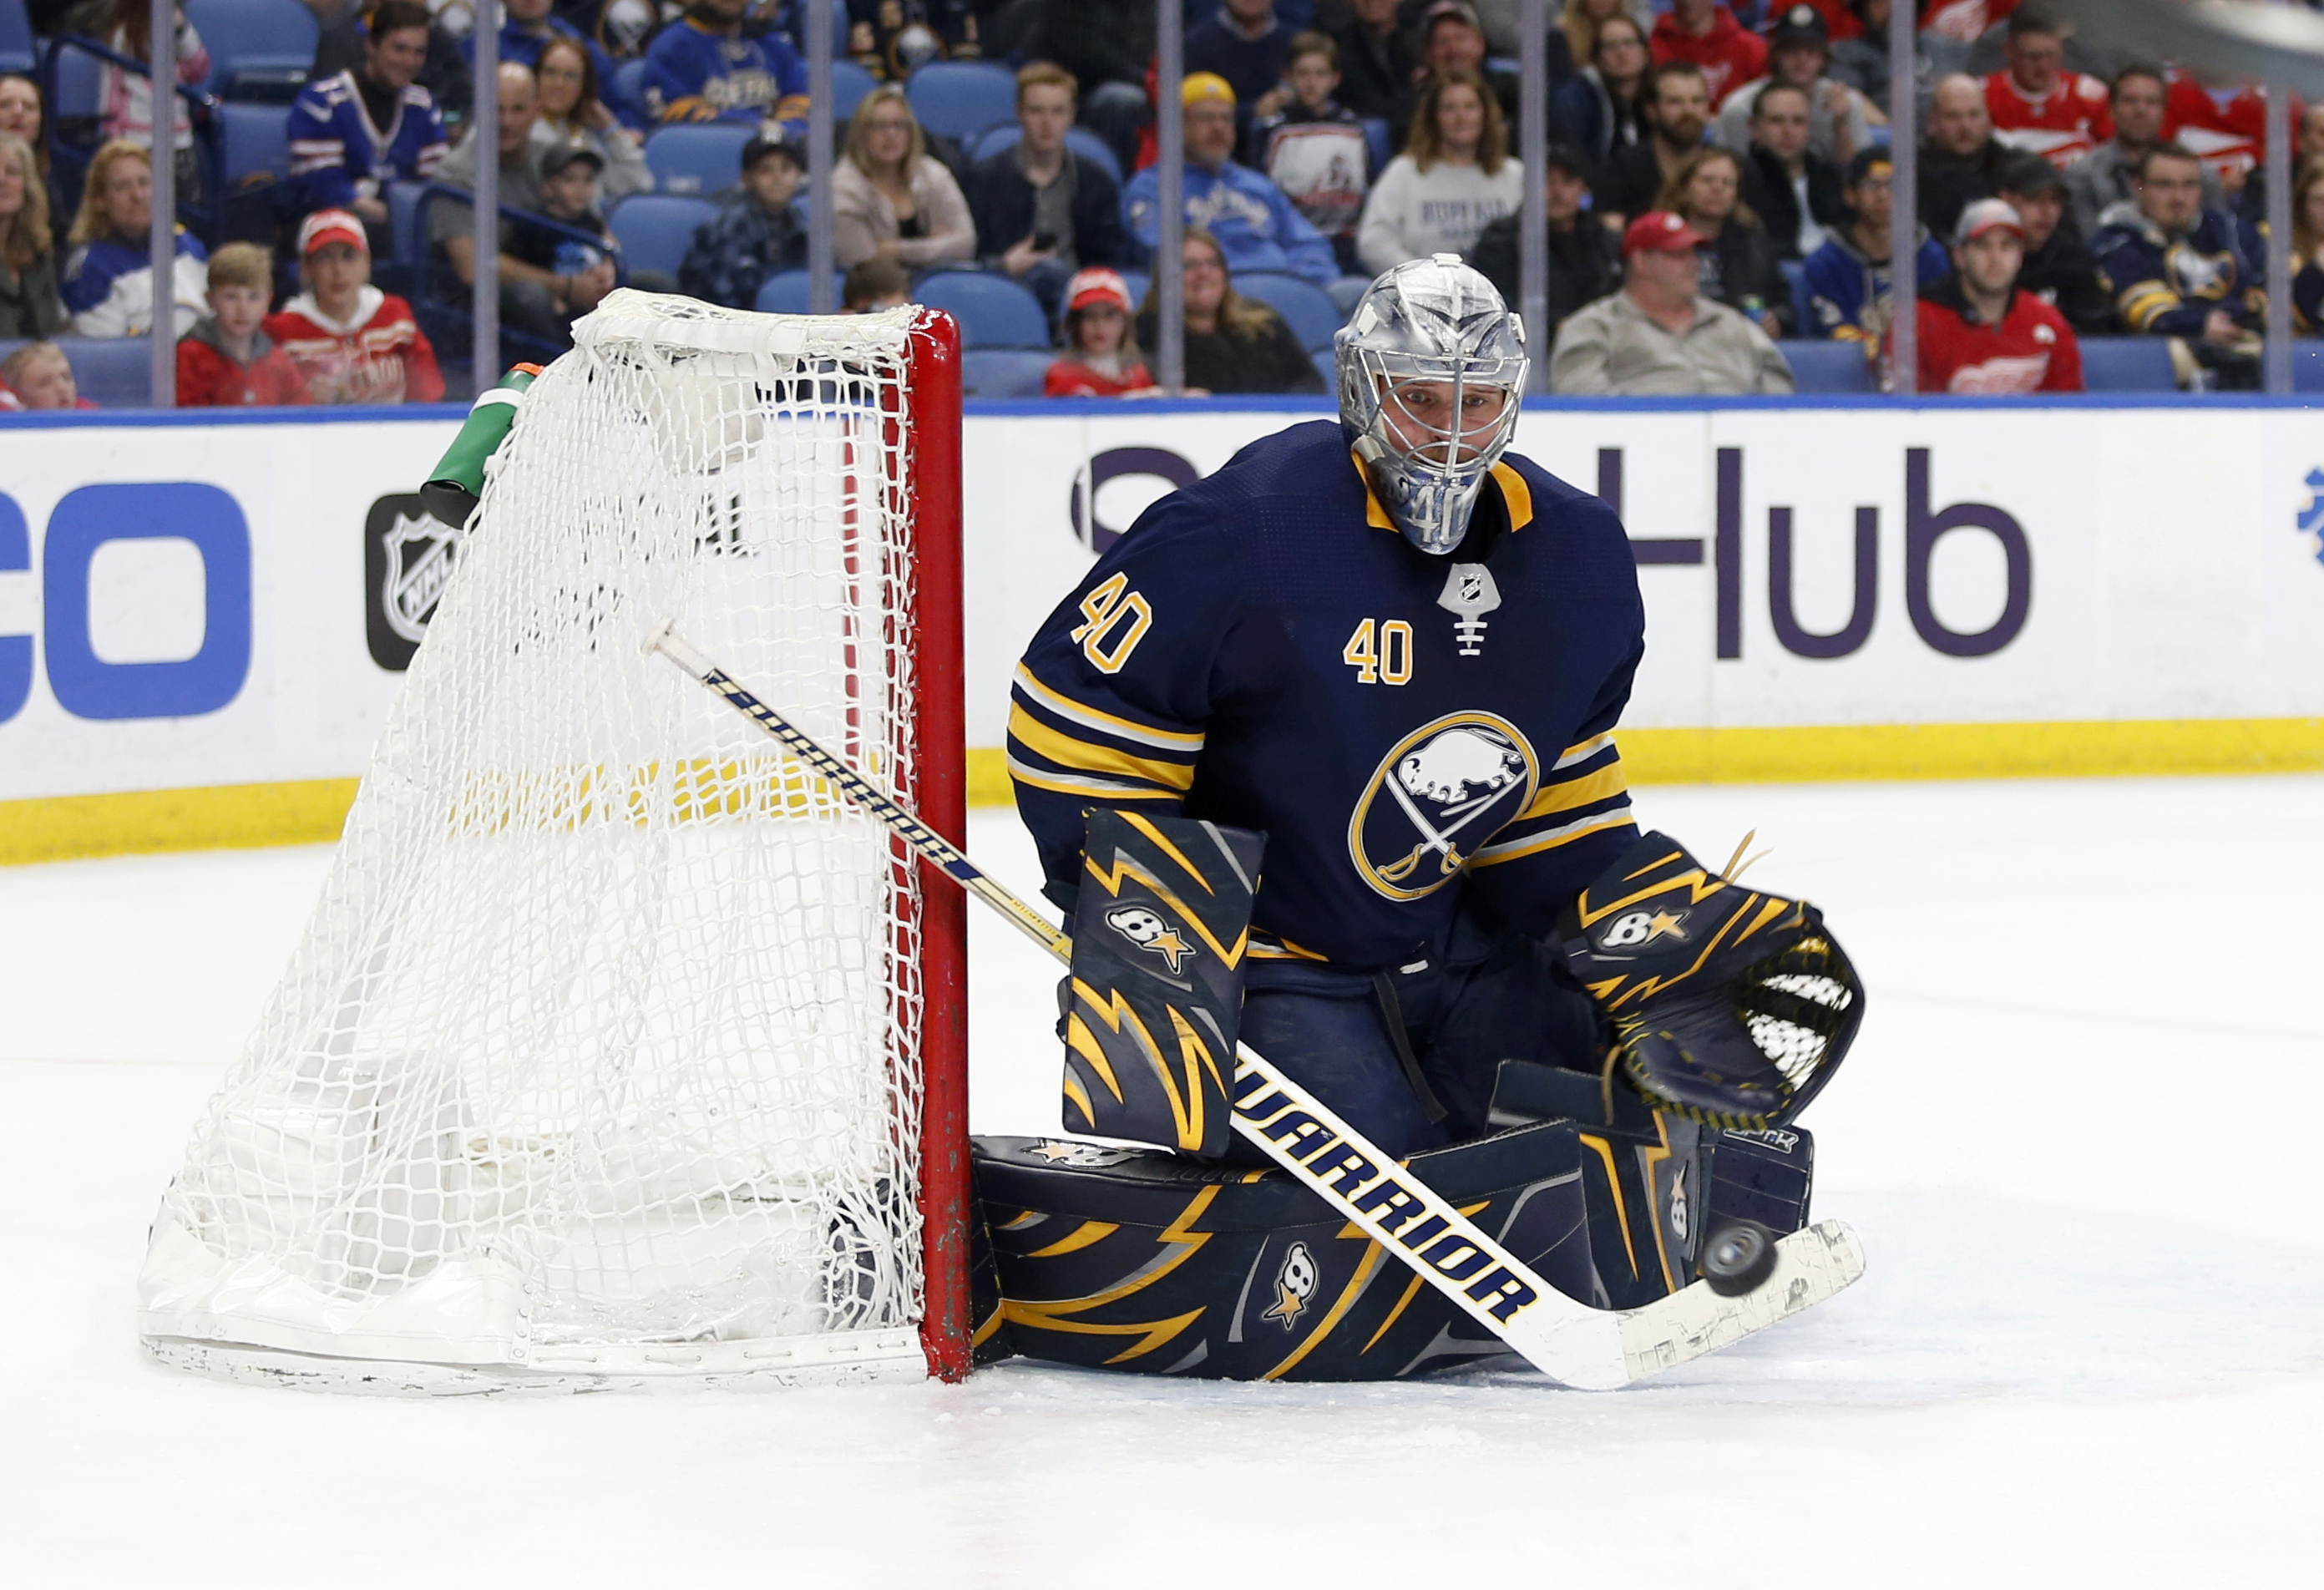 Mar 29, 2018; Buffalo, NY, USA; Buffalo Sabres goaltender Robin Lehner (40) looks to make a save during the first period against the Detroit Red Wings at KeyBank Center. Mandatory Credit: Timothy T. Ludwig-USA TODAY Sports